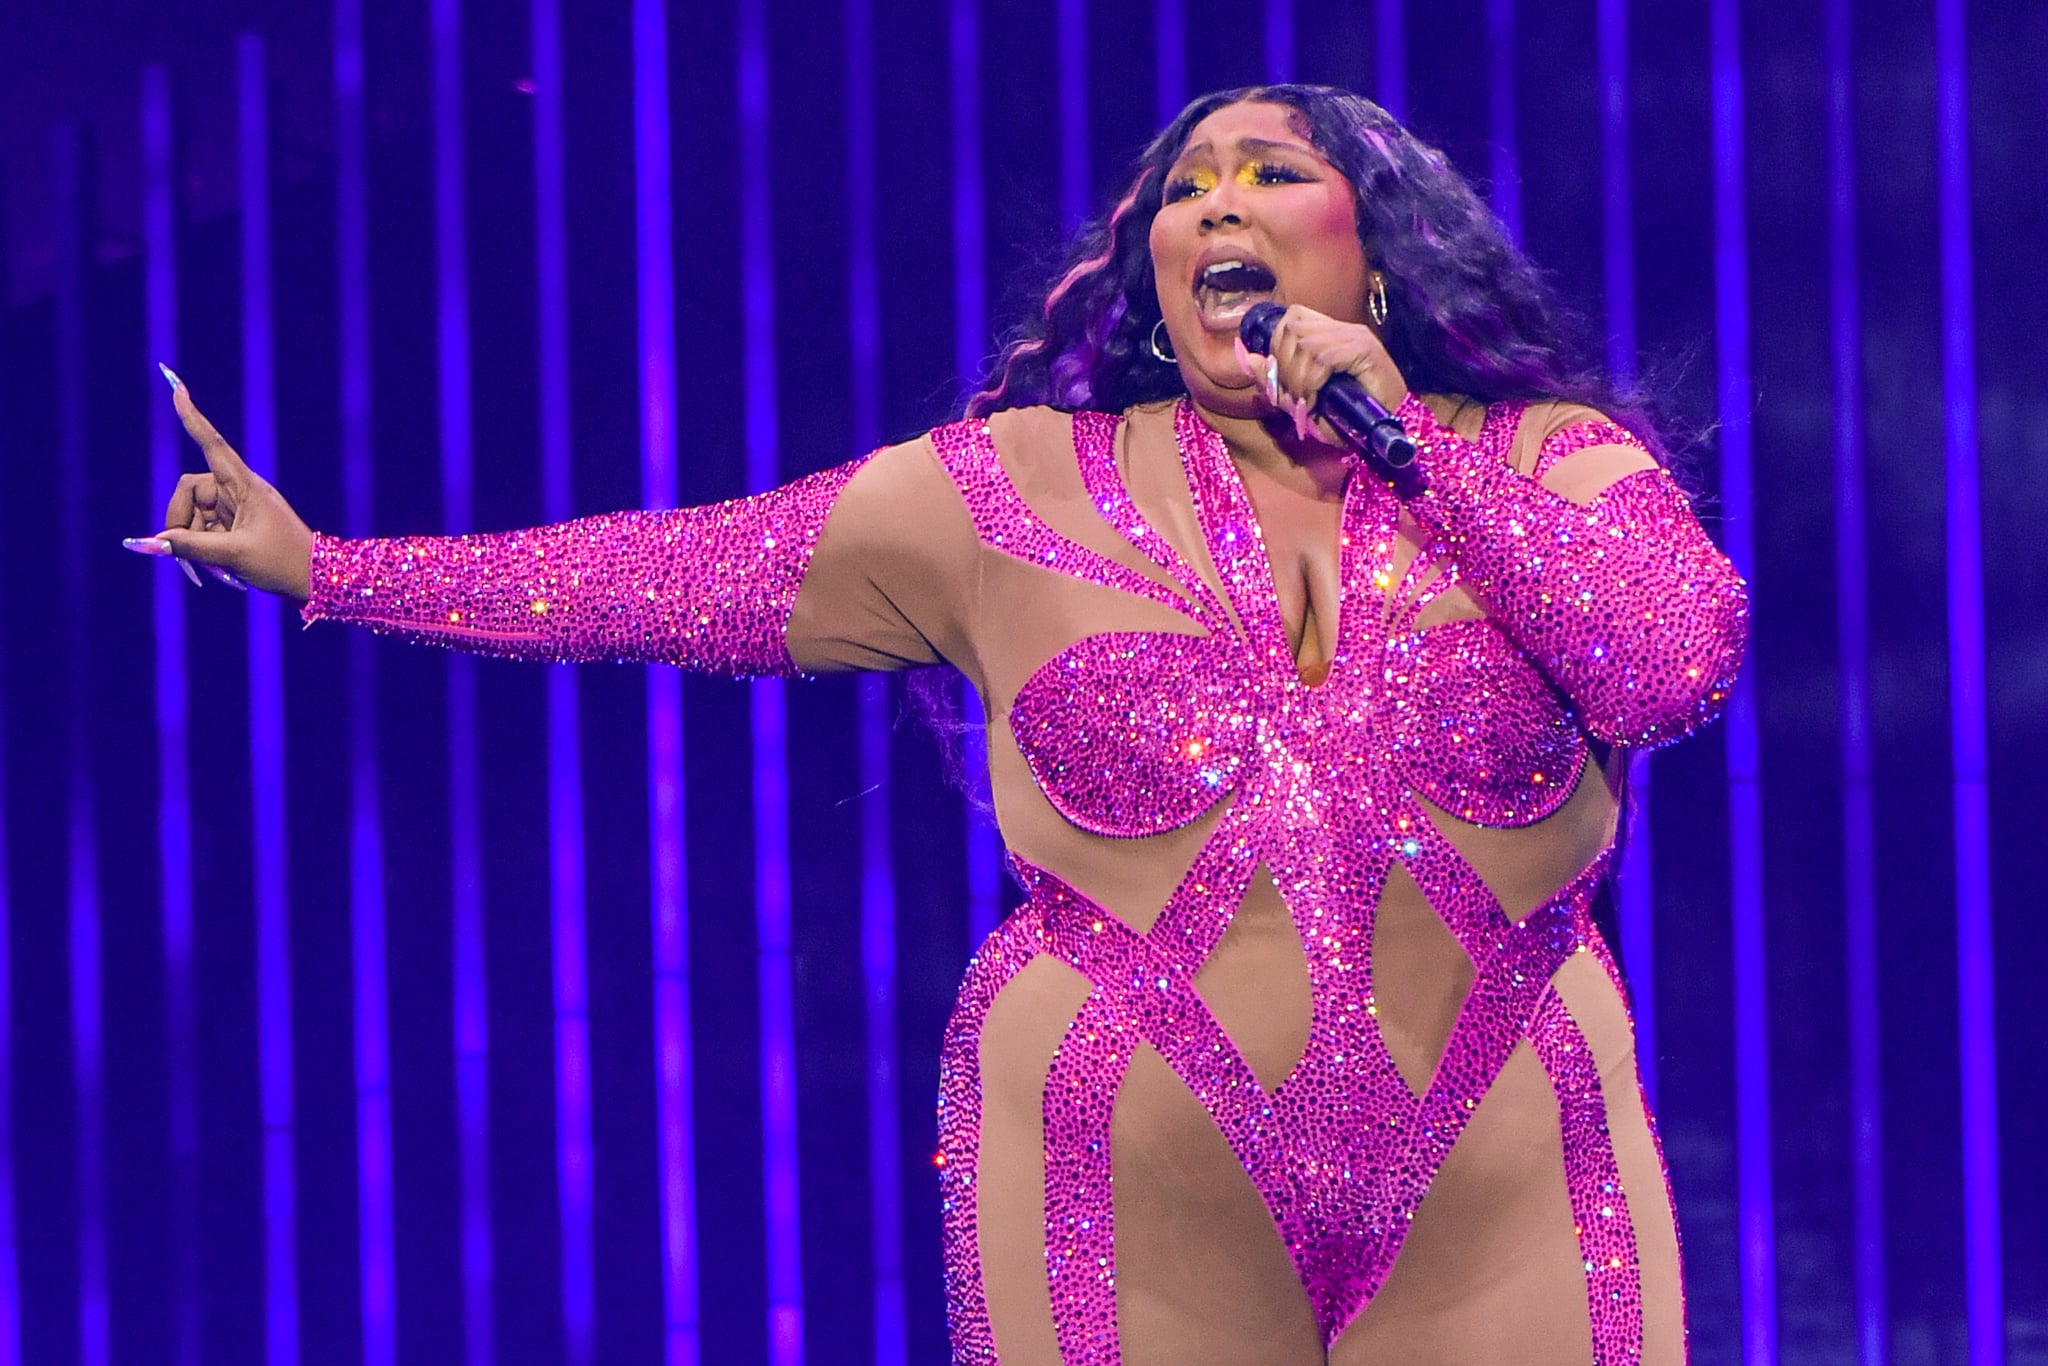 DETROIT, MICHIGAN - OCTOBER 06: Lizzo performs onstage at Little Caesars Arena on October 06, 2022 in Detroit, Michigan. (Photo by Aaron J. Thornton/Getty Images)